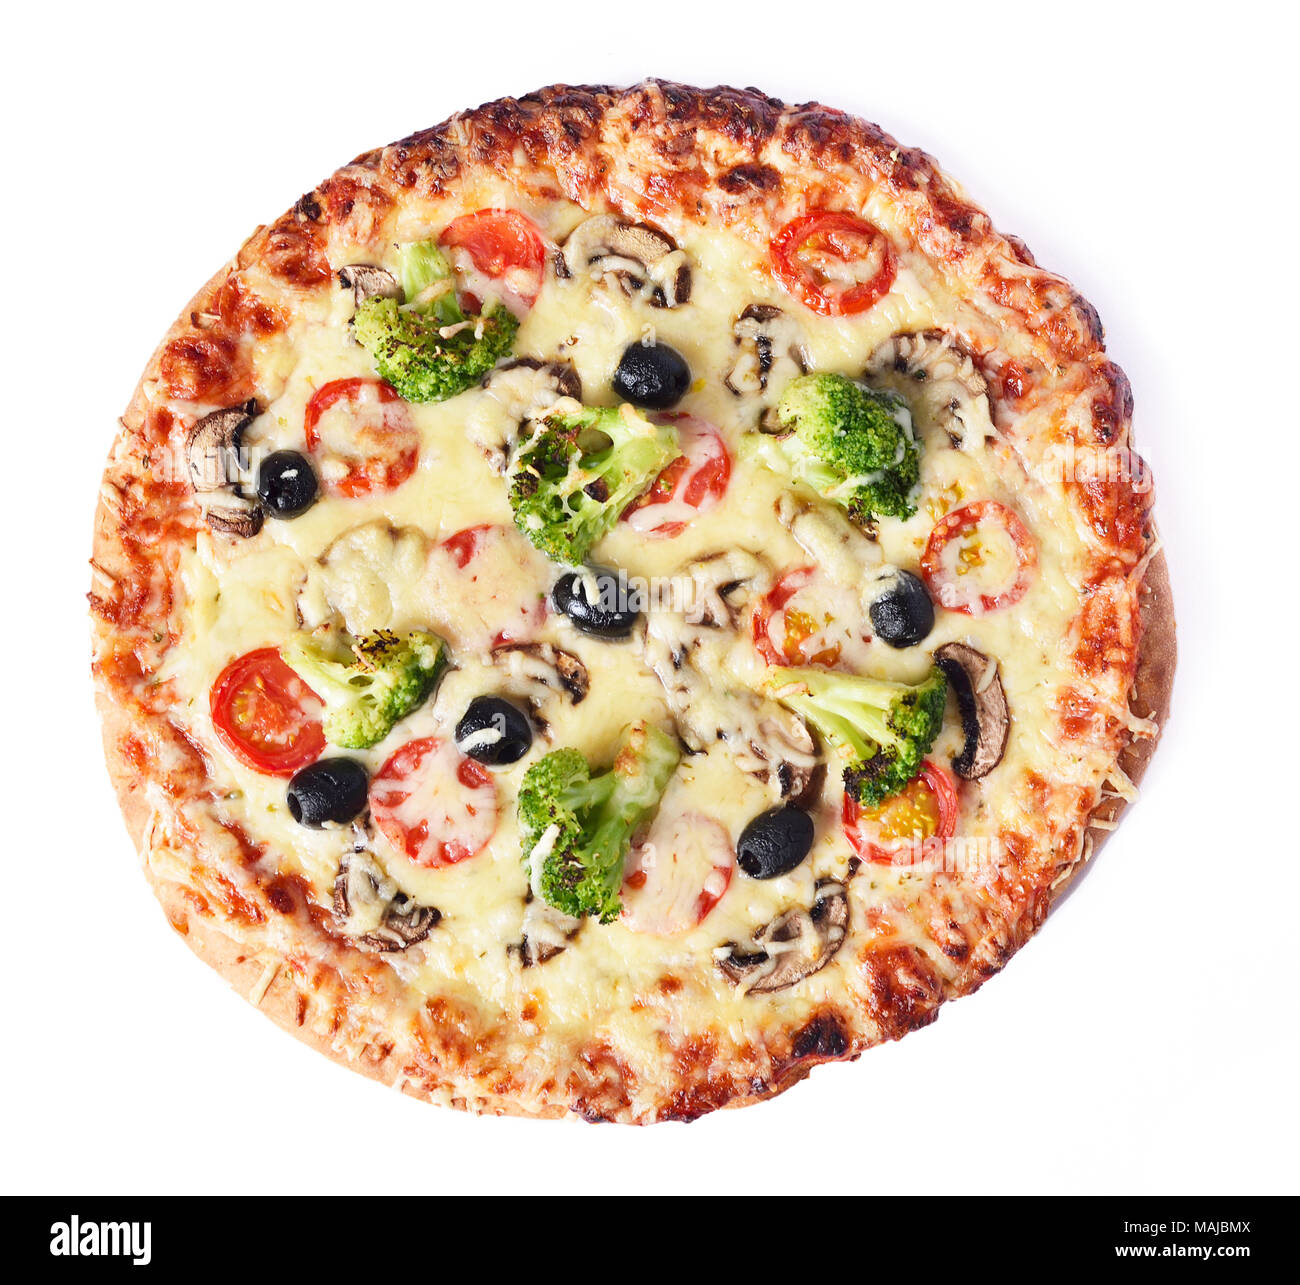 Vegetable pizza, isolated on white background.High angle view of a vegetarian pizza with mushrooms, fresh tomatoes, olives, broccoli and cheese. Stock Photo